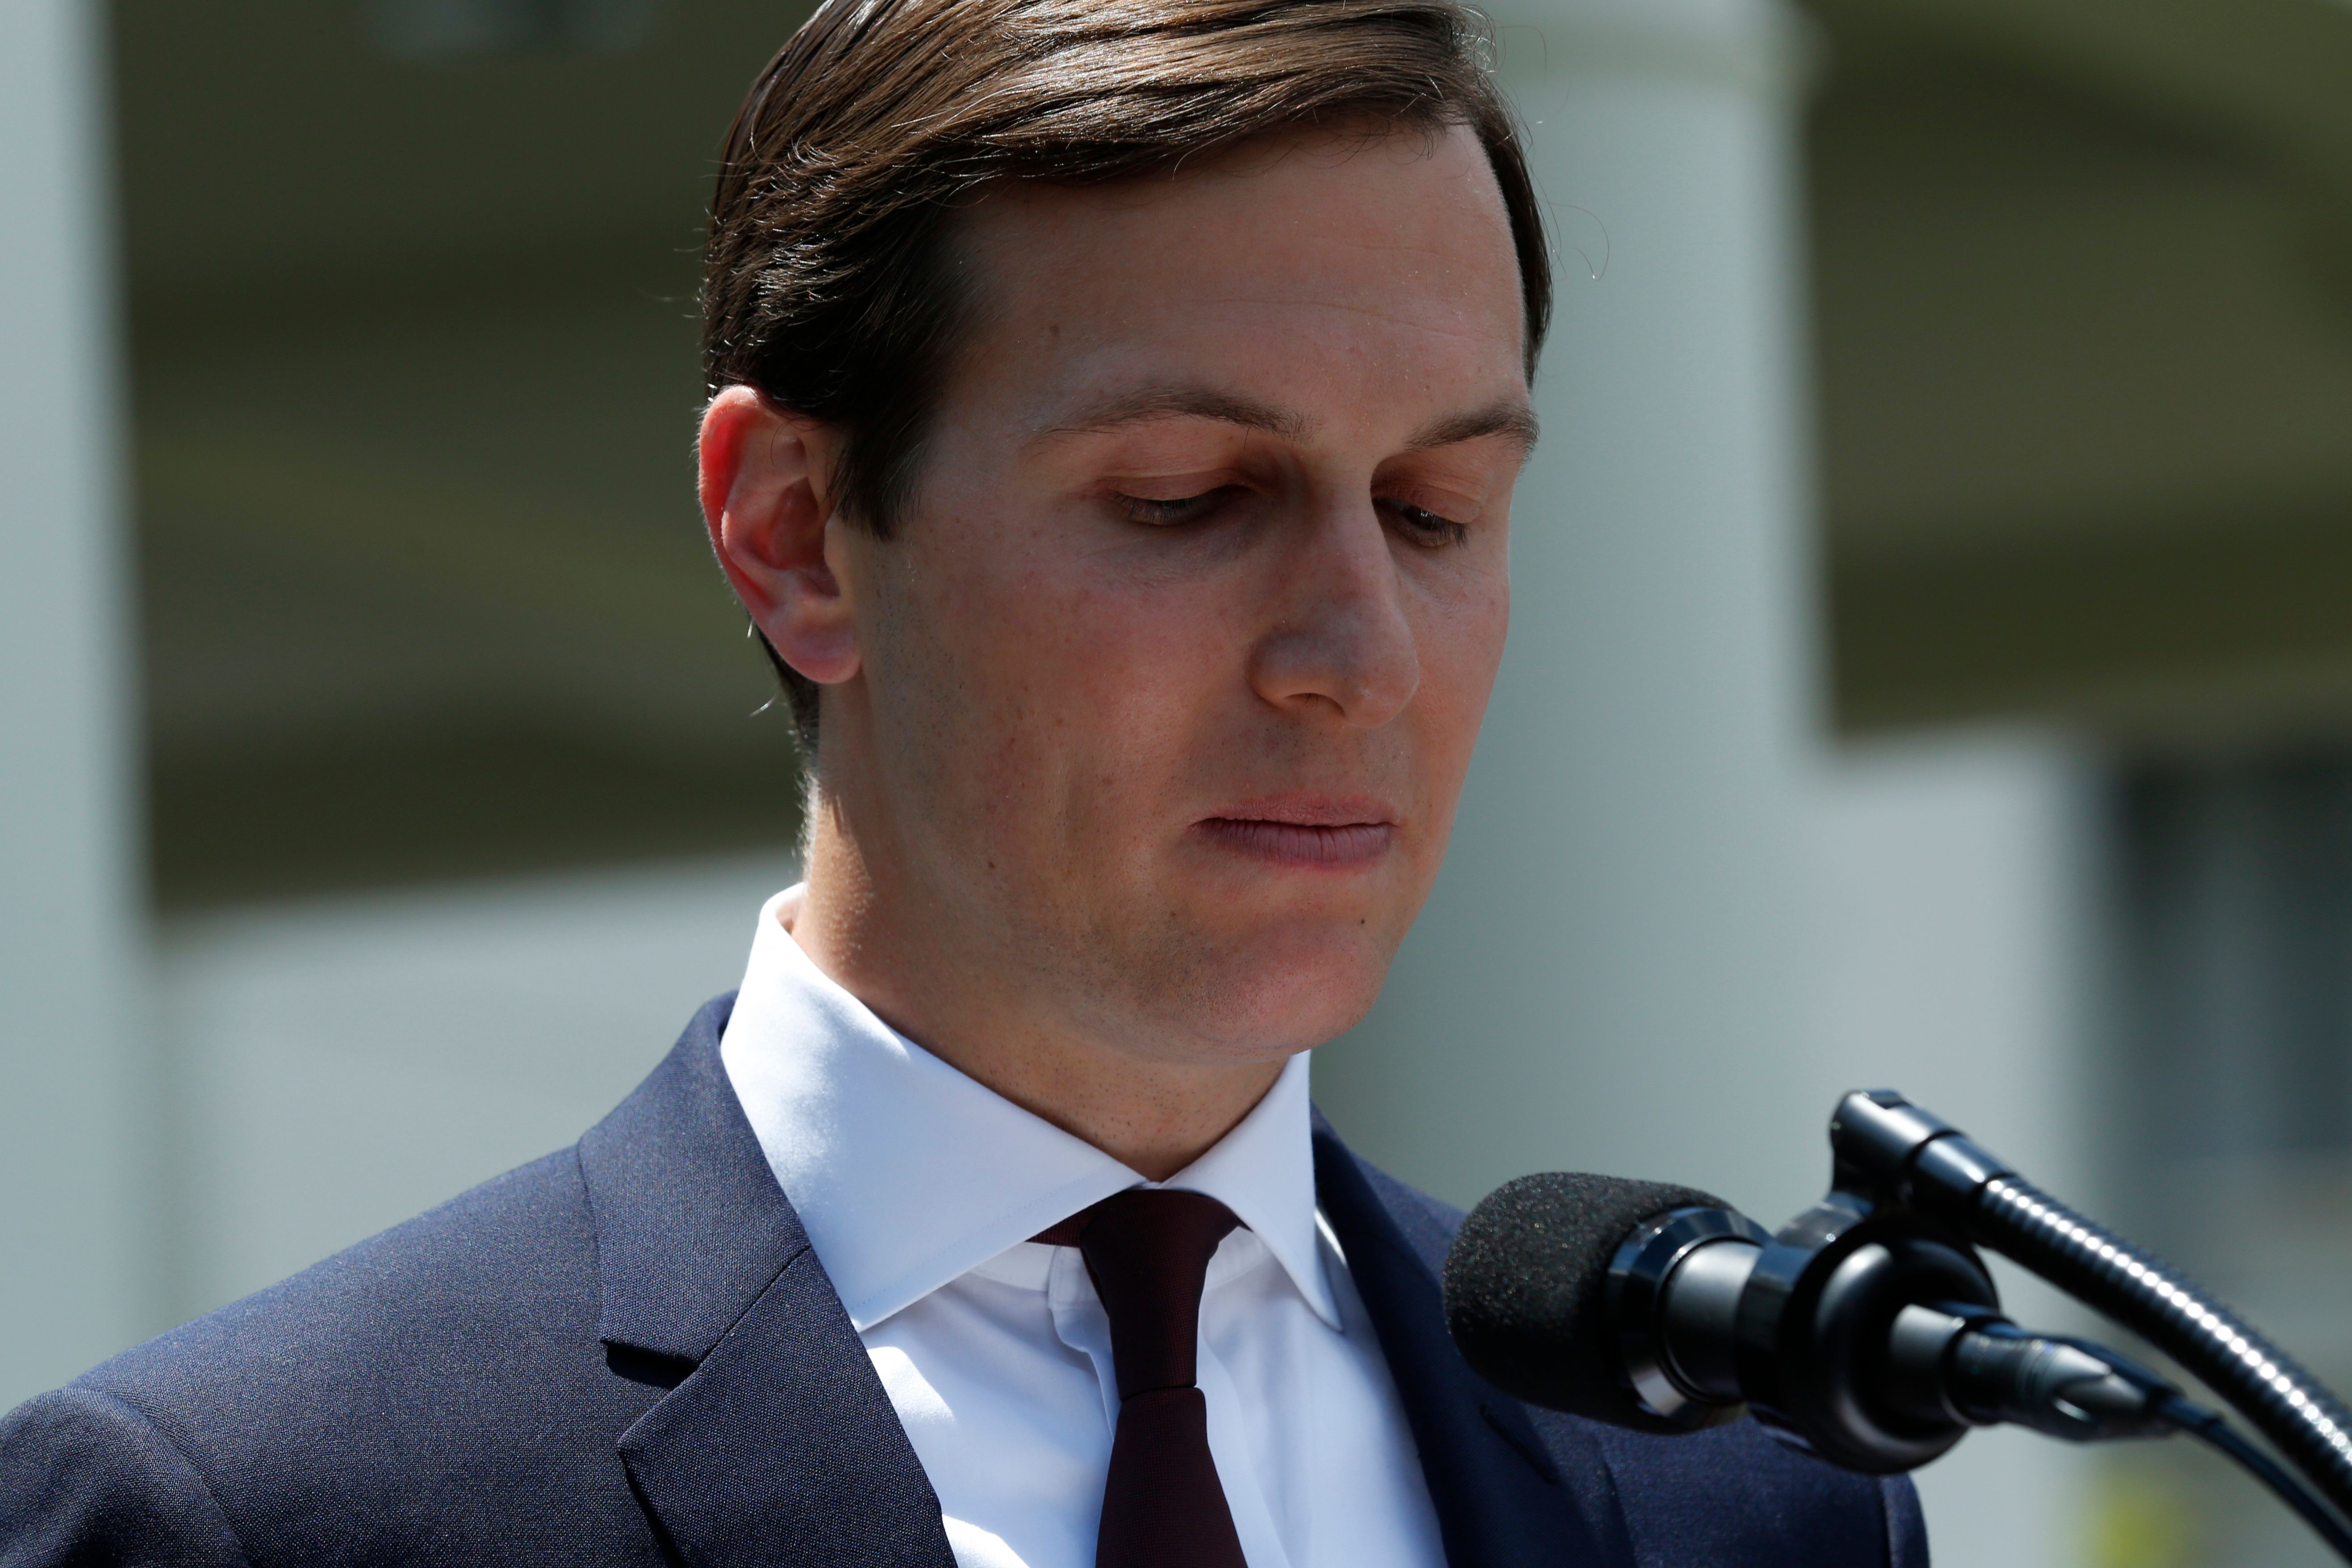 New York state has asked three banks to supply information about their relationships with the real estate business of Jared Kushner. Photo: AFP